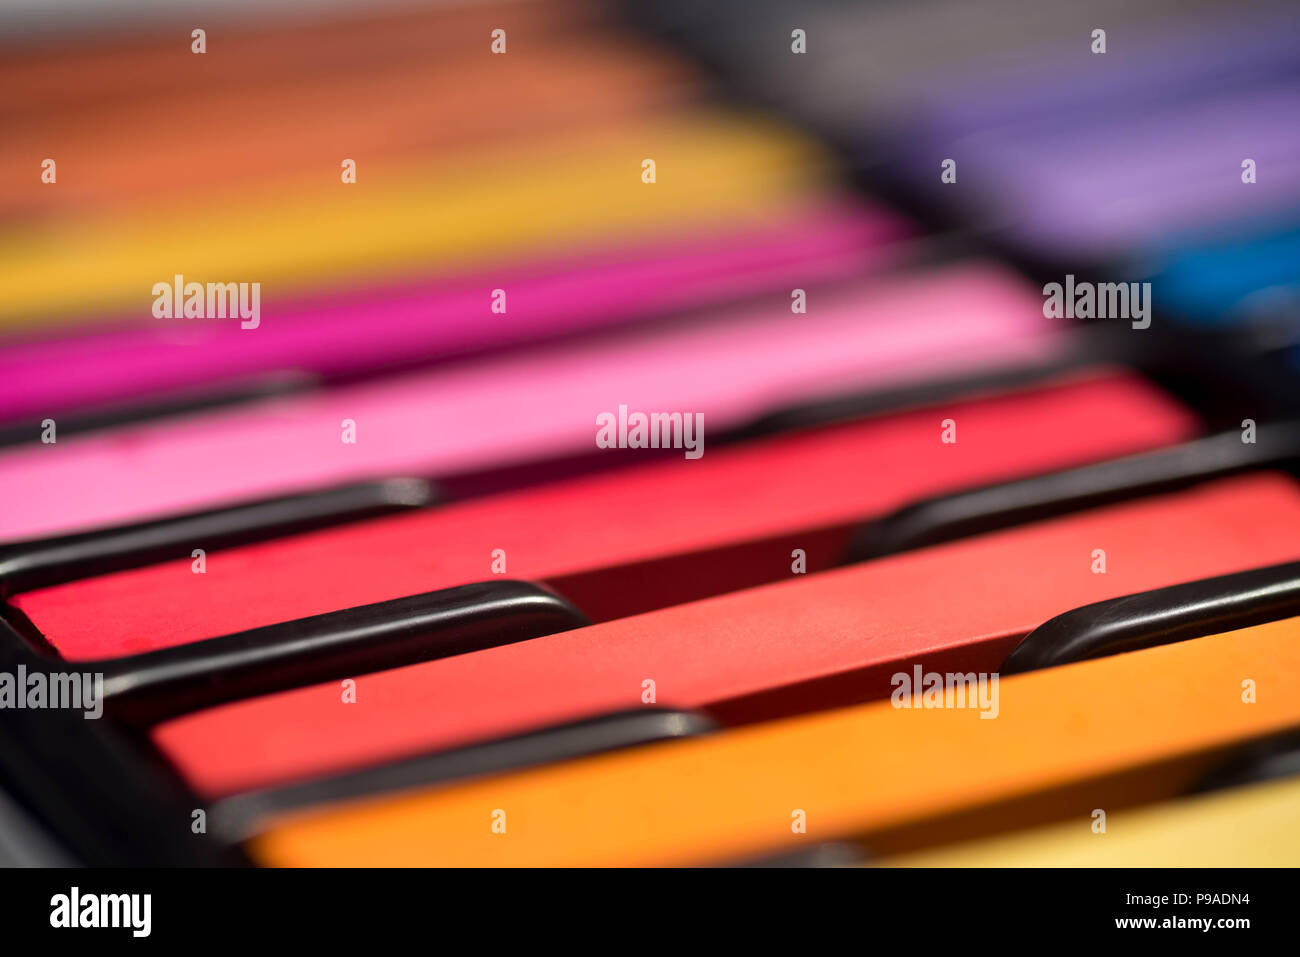 Box of oil pastel crayons stock photo. Image of concentration